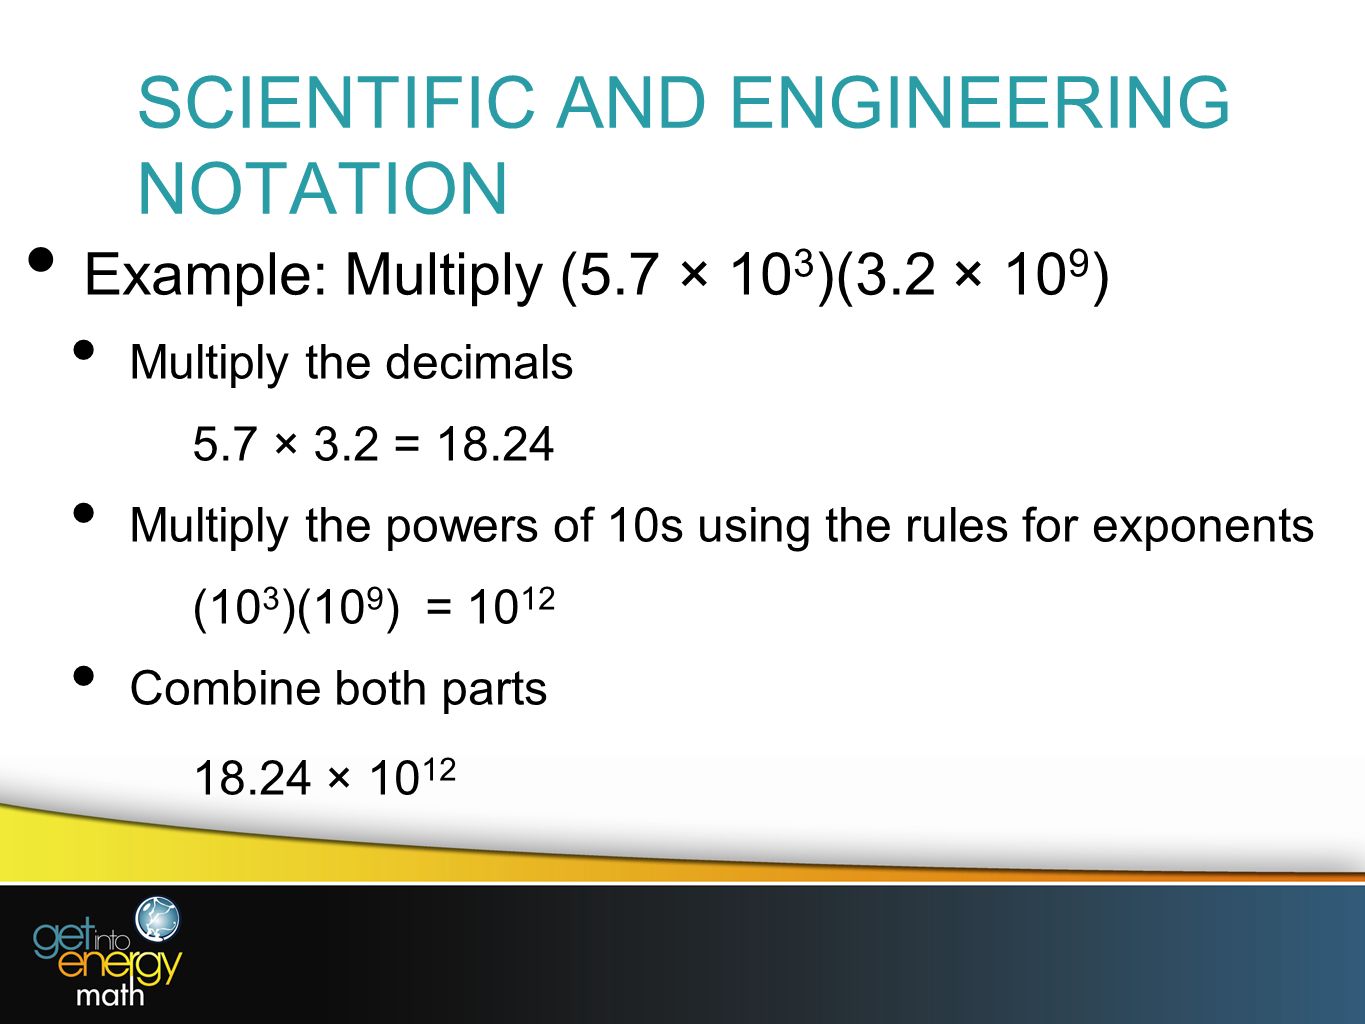 SCIENTIFIC AND ENGINEERING NOTATION